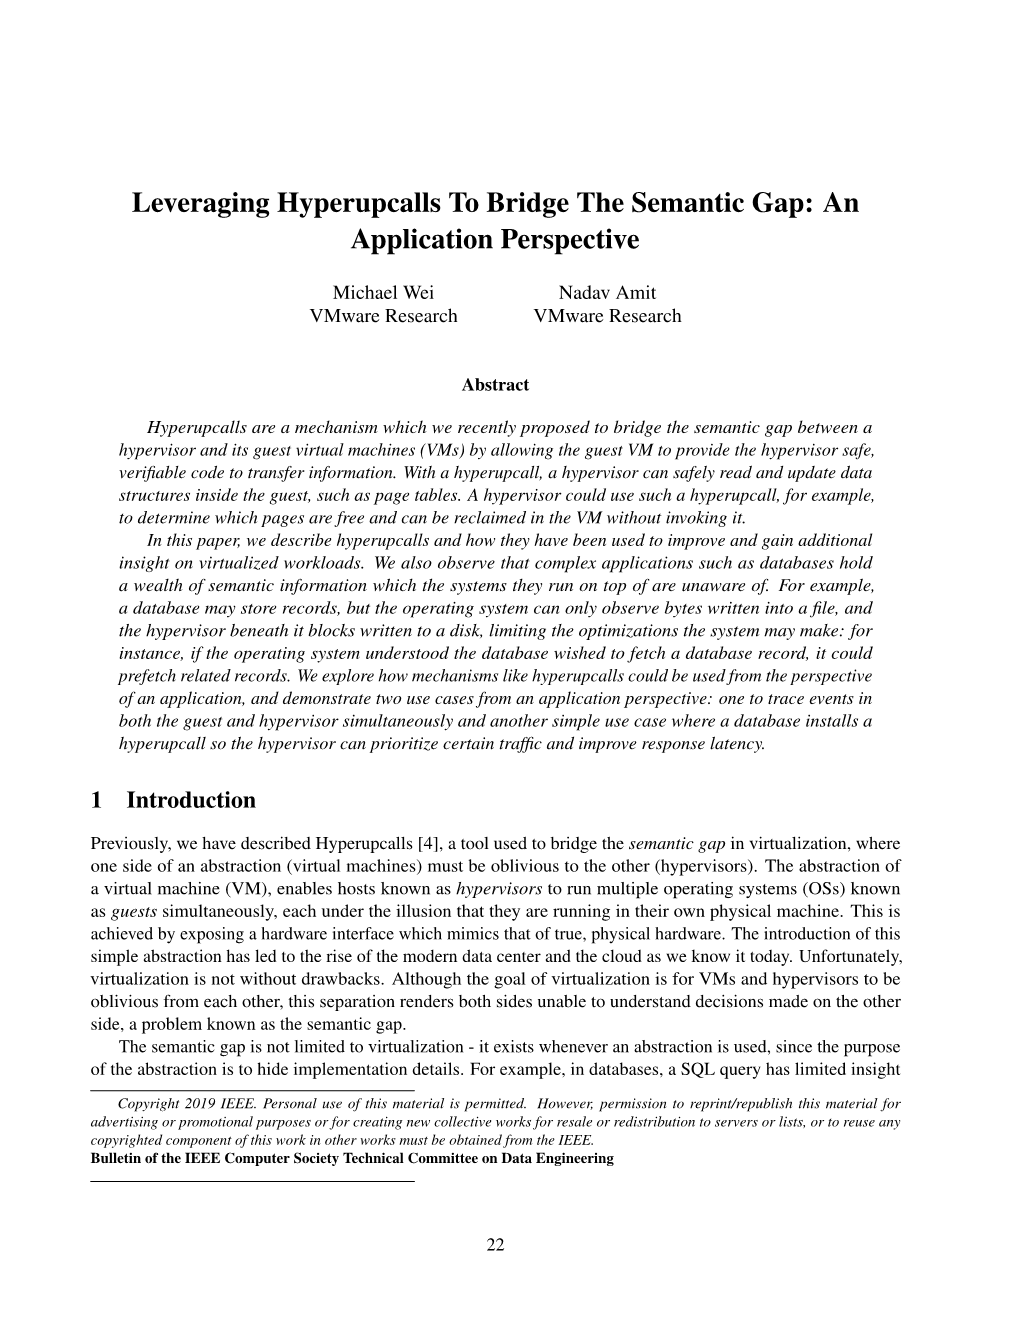 Leveraging Hyperupcalls to Bridge the Semantic Gap: an Application Perspective